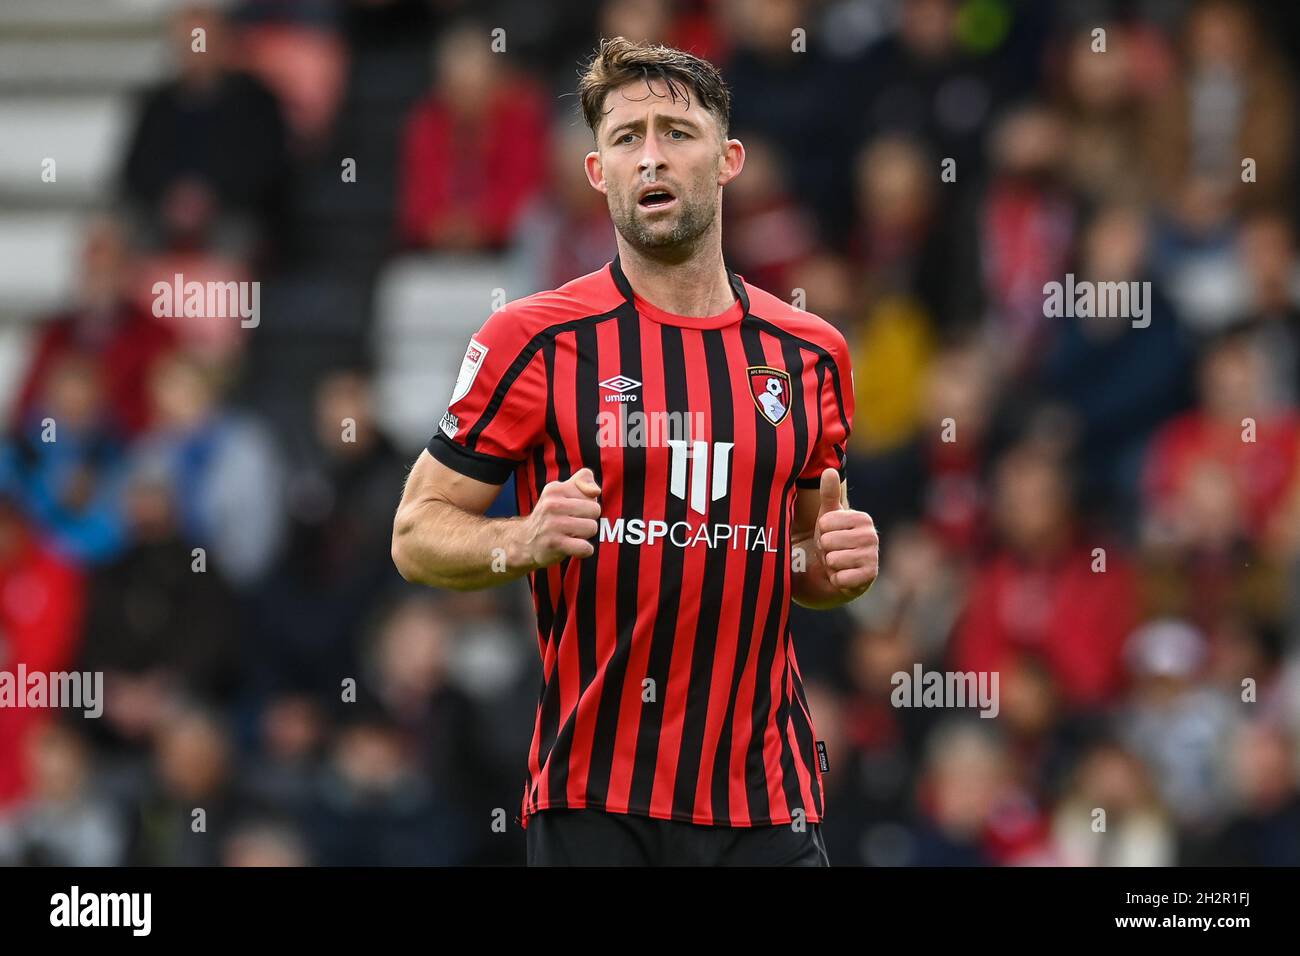 Gary Cahill #24 of Bournemouth during the game in ,  on 10/23/2021. (Photo by Craig Thomas/News Images/Sipa USA) Stock Photo